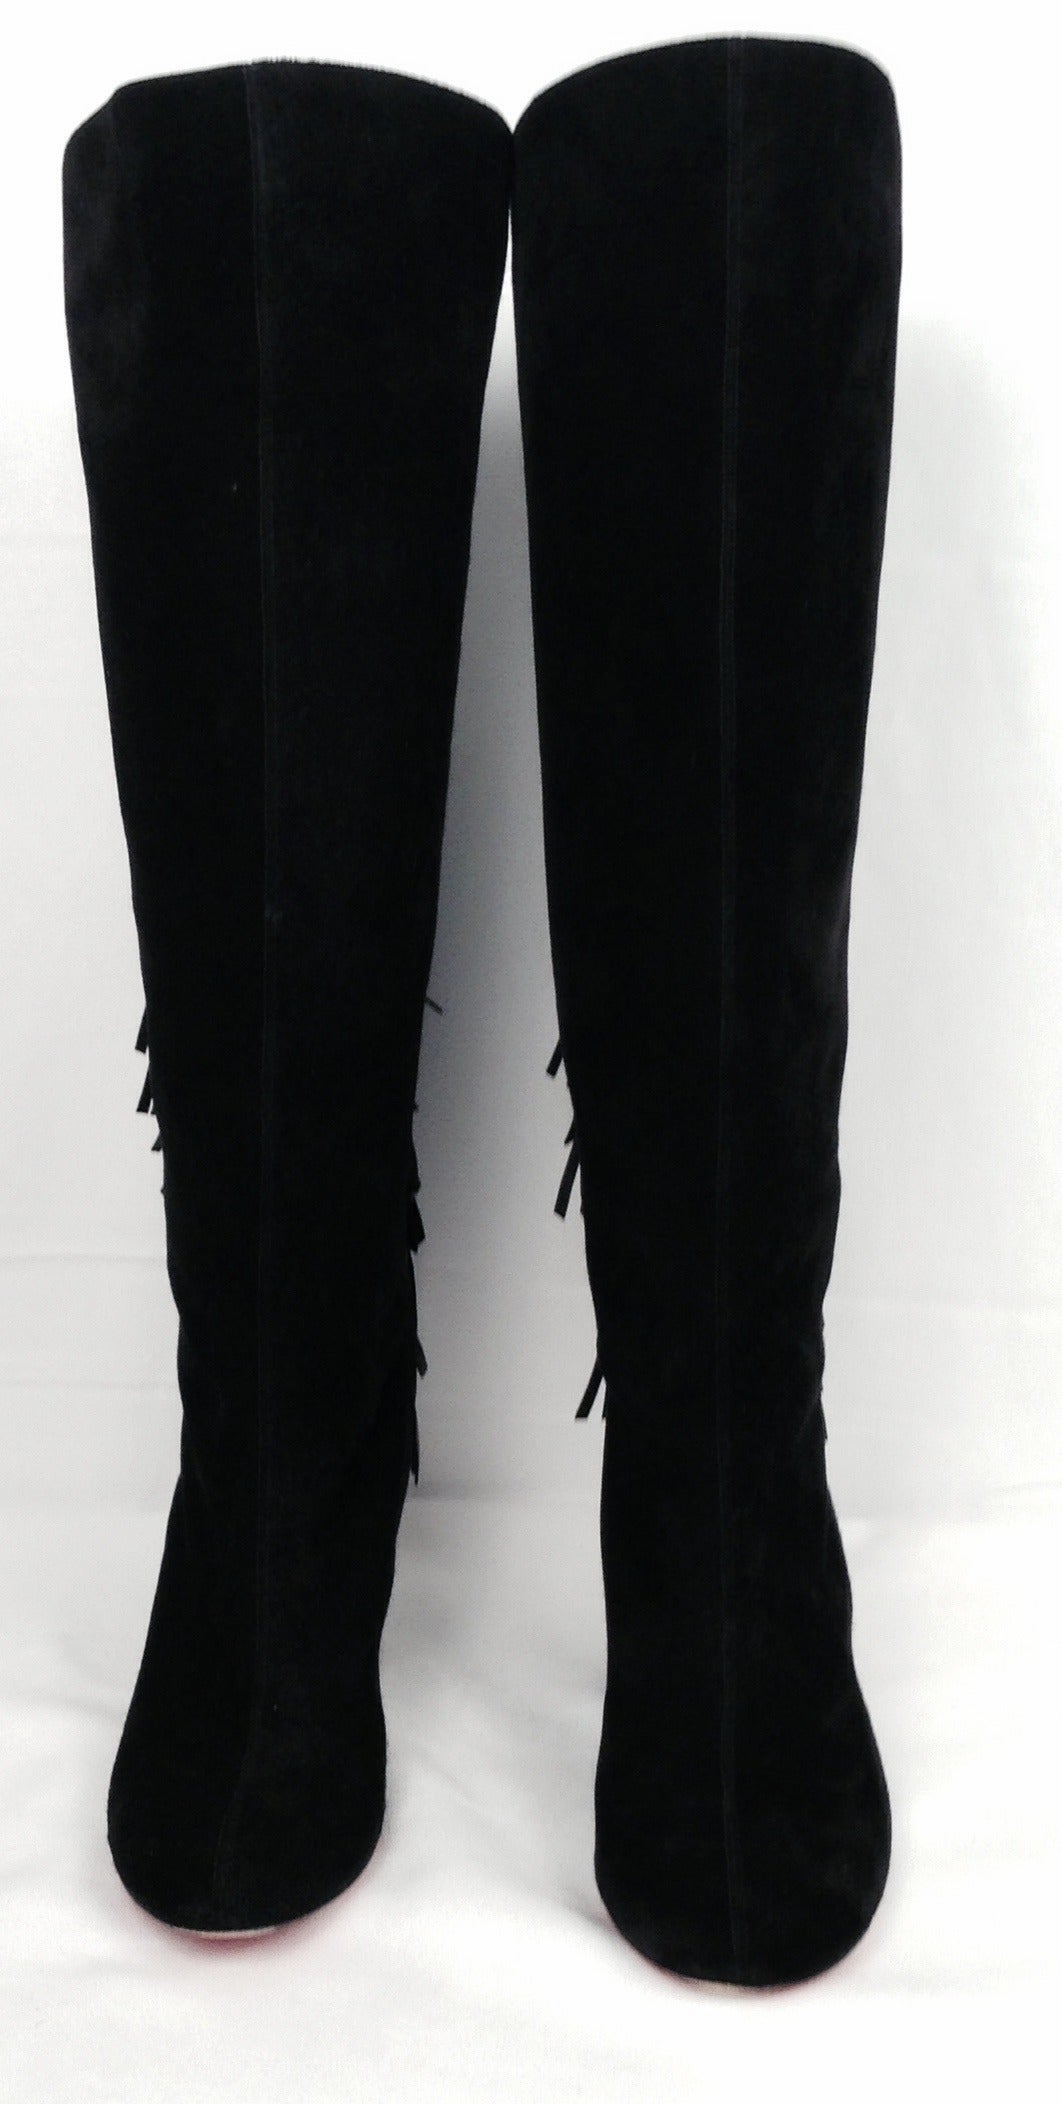 Christian Louboutin strikes again in these eye-catching black suede knee boots with wedge heel!  Boots feature luxurious 